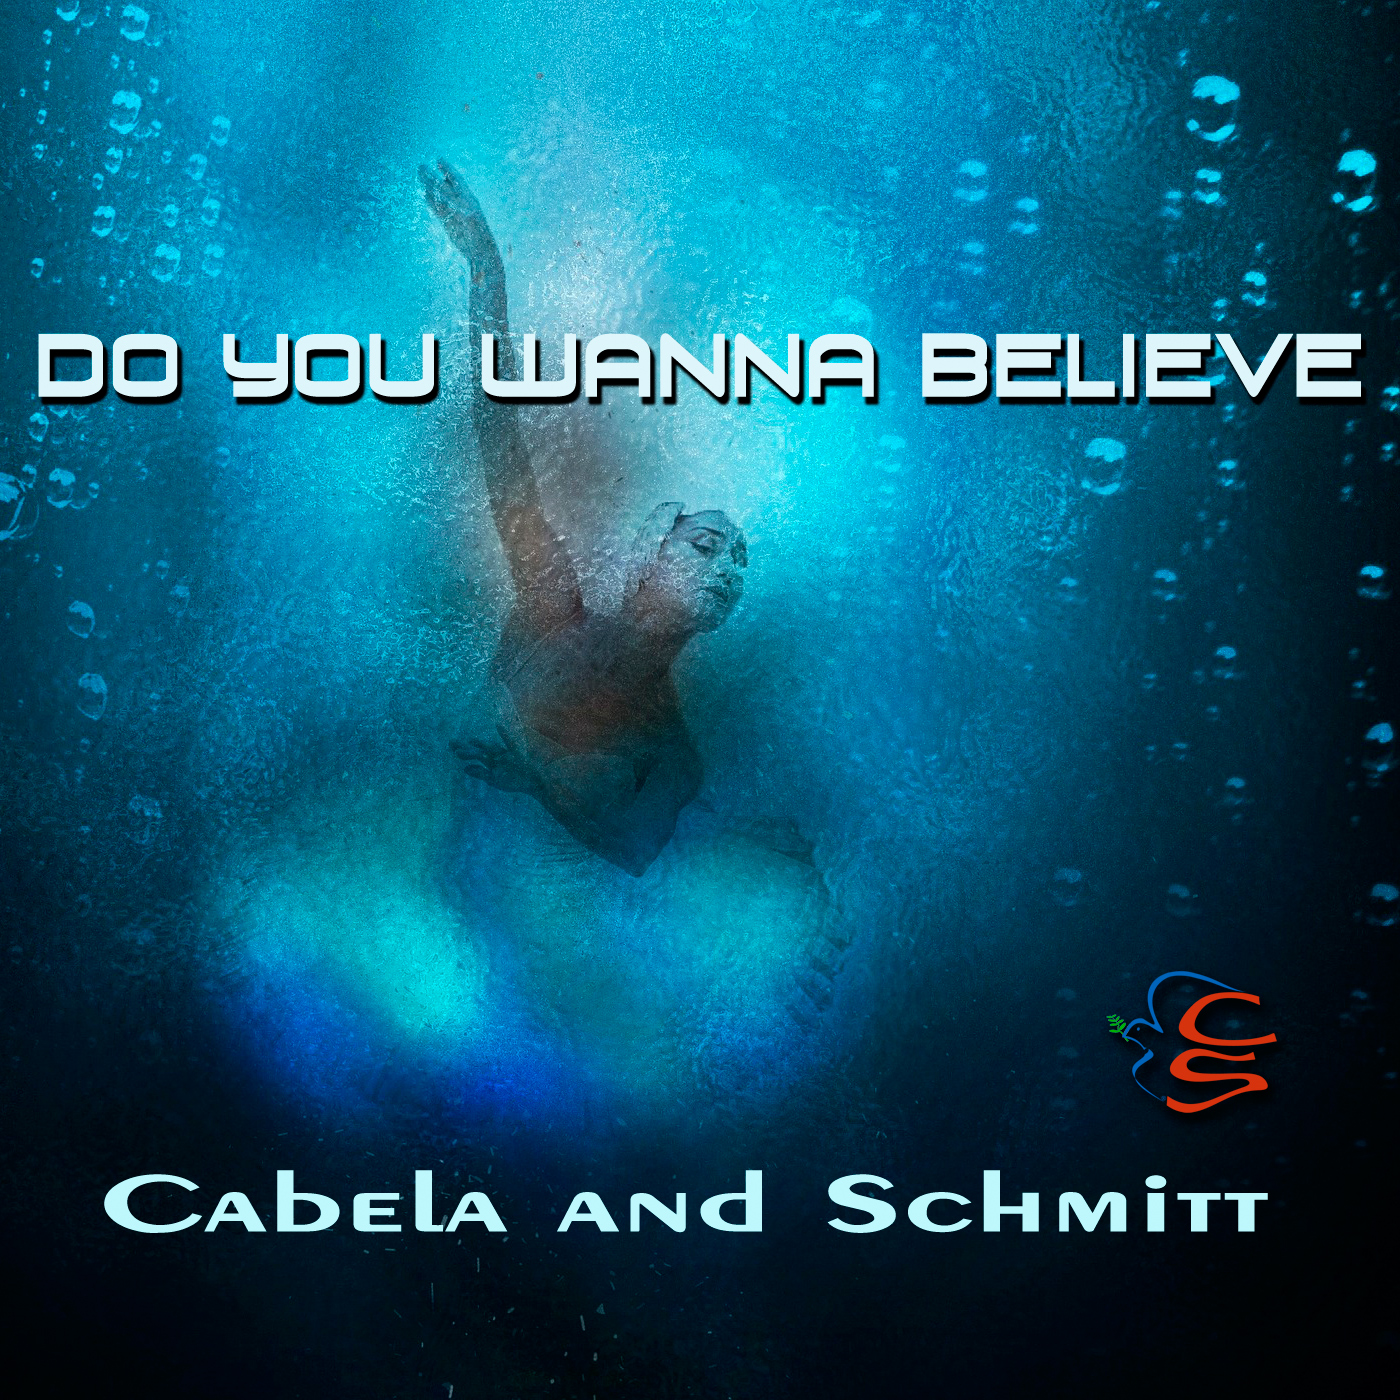 Cabela and Schmitt Connect with a Profound Message Inspiring Hope on New Single ‘Do You Wanna Believe’